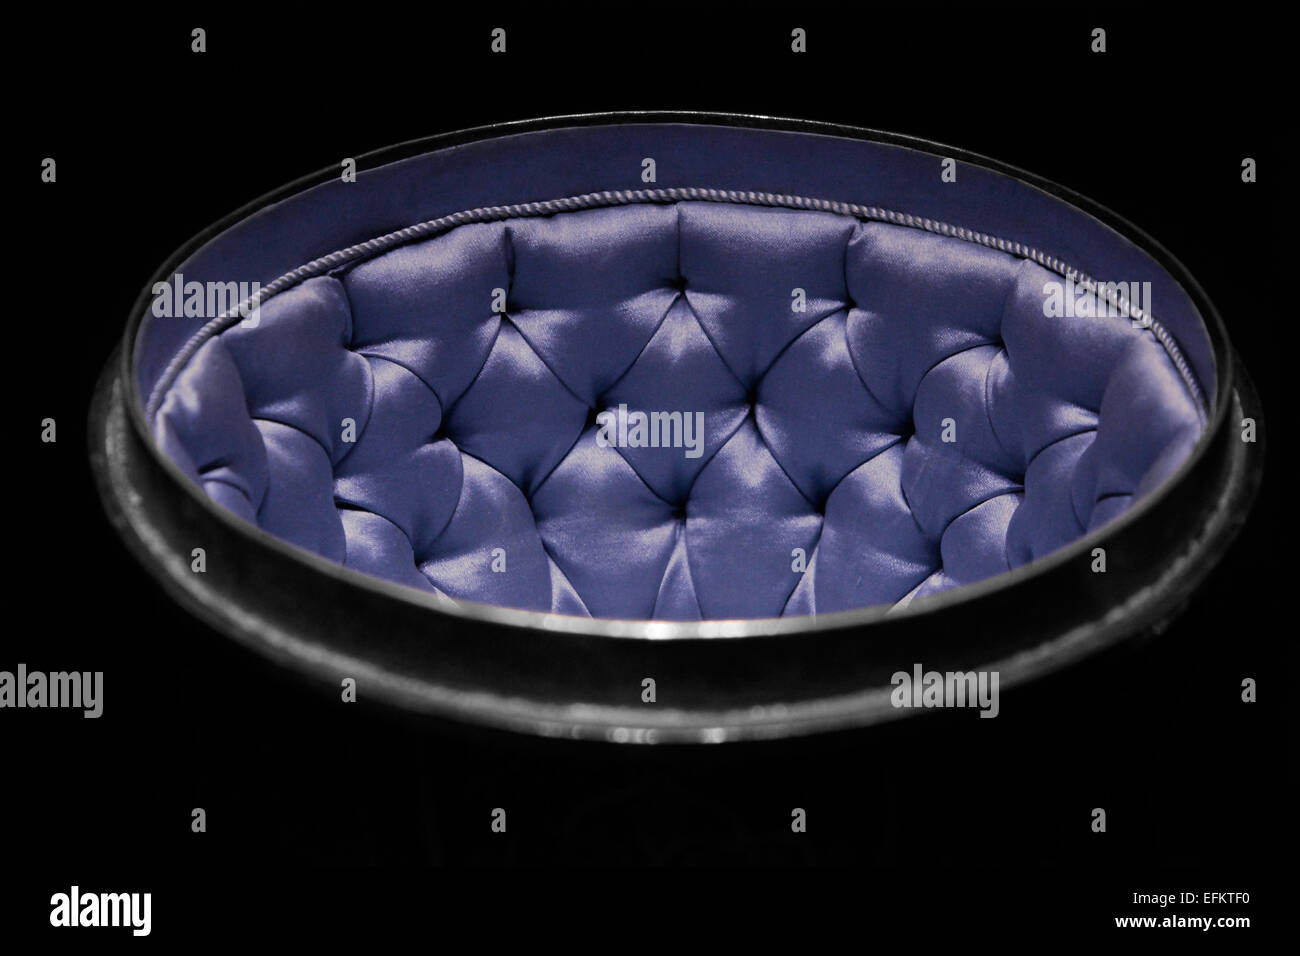 Hemispherical container for precious objects upholstered with blue satin Stock Photo